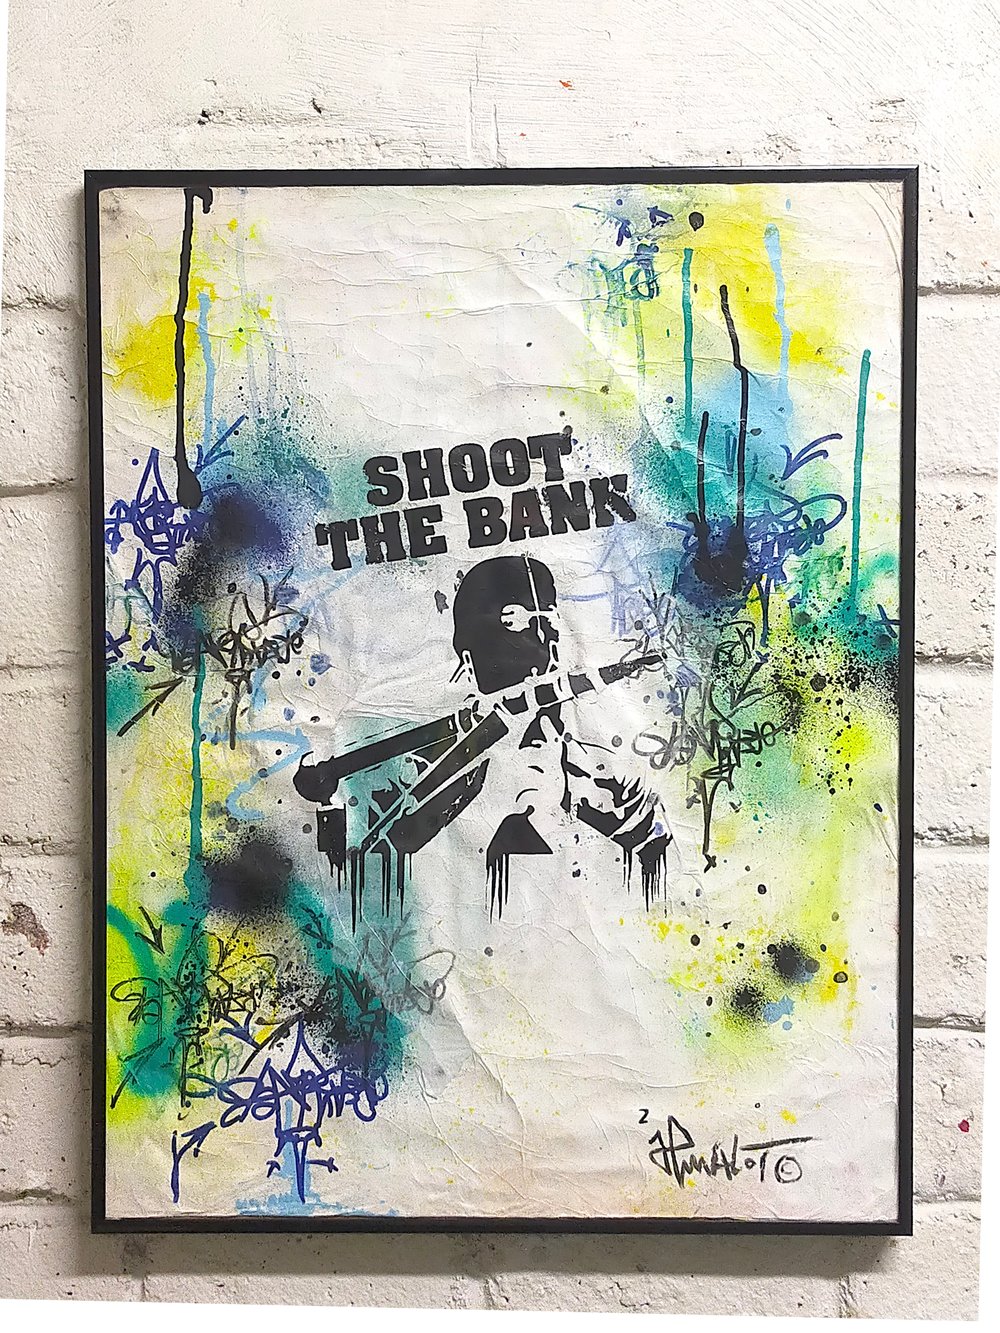 SHOOT THE BANK 2022. On paper. Signed by artist.